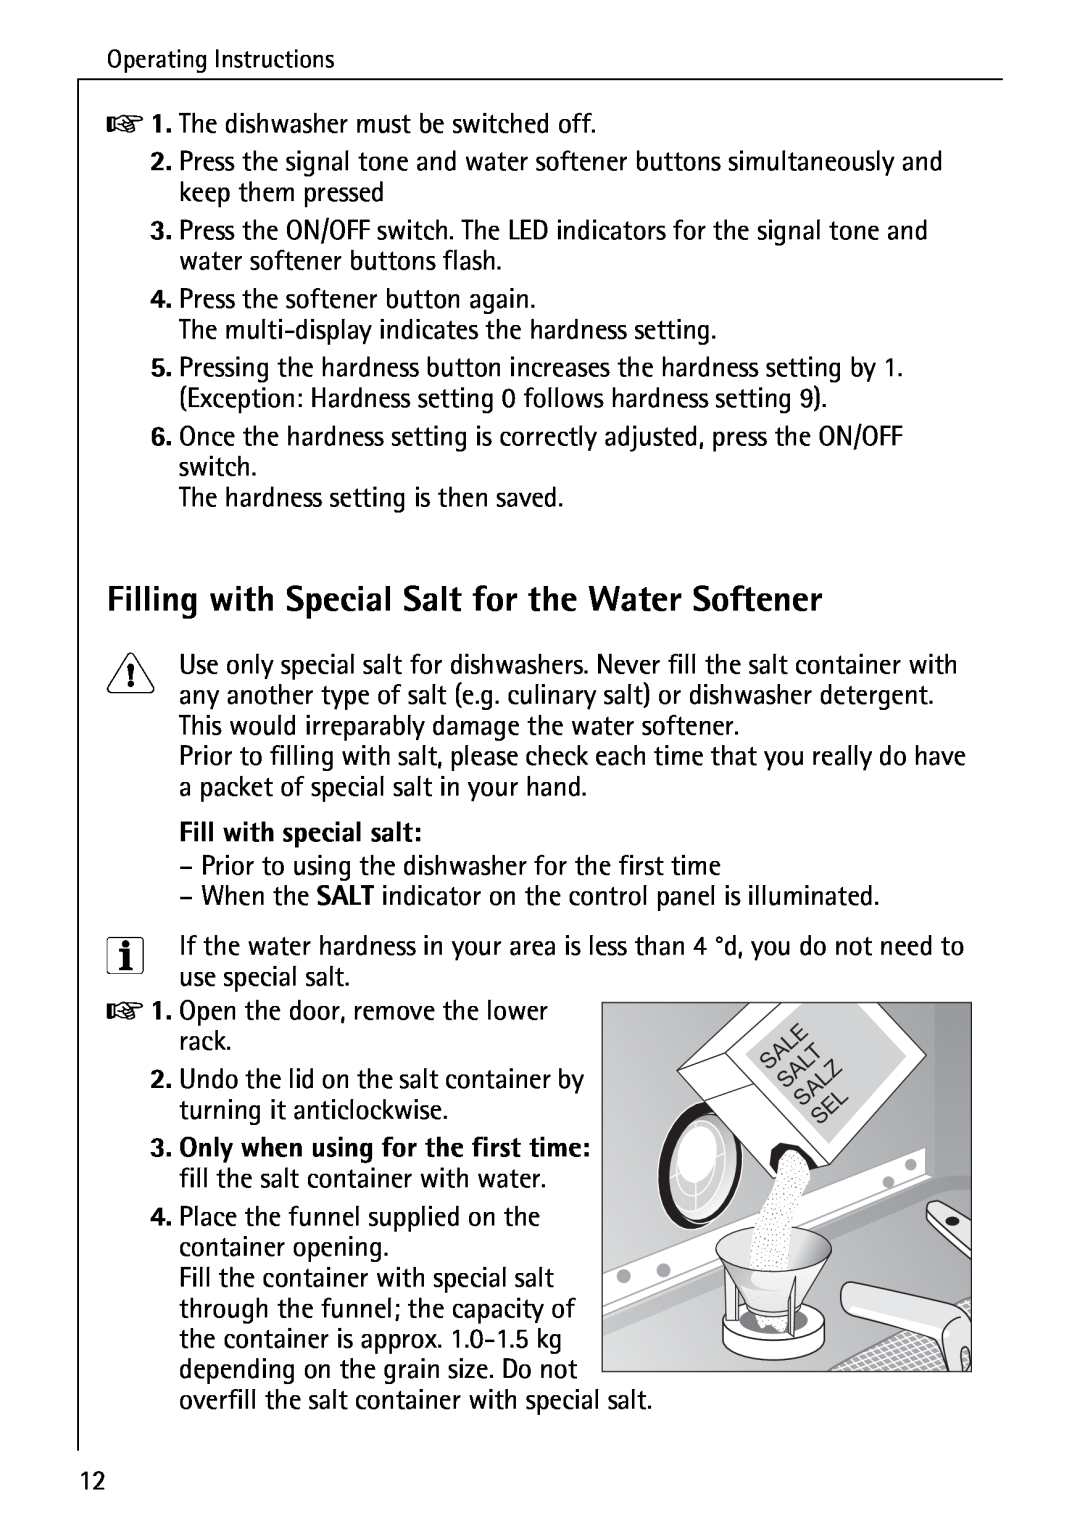 AEG 80850 I manual Filling with Special Salt for the Water Softener, Fill with special salt 